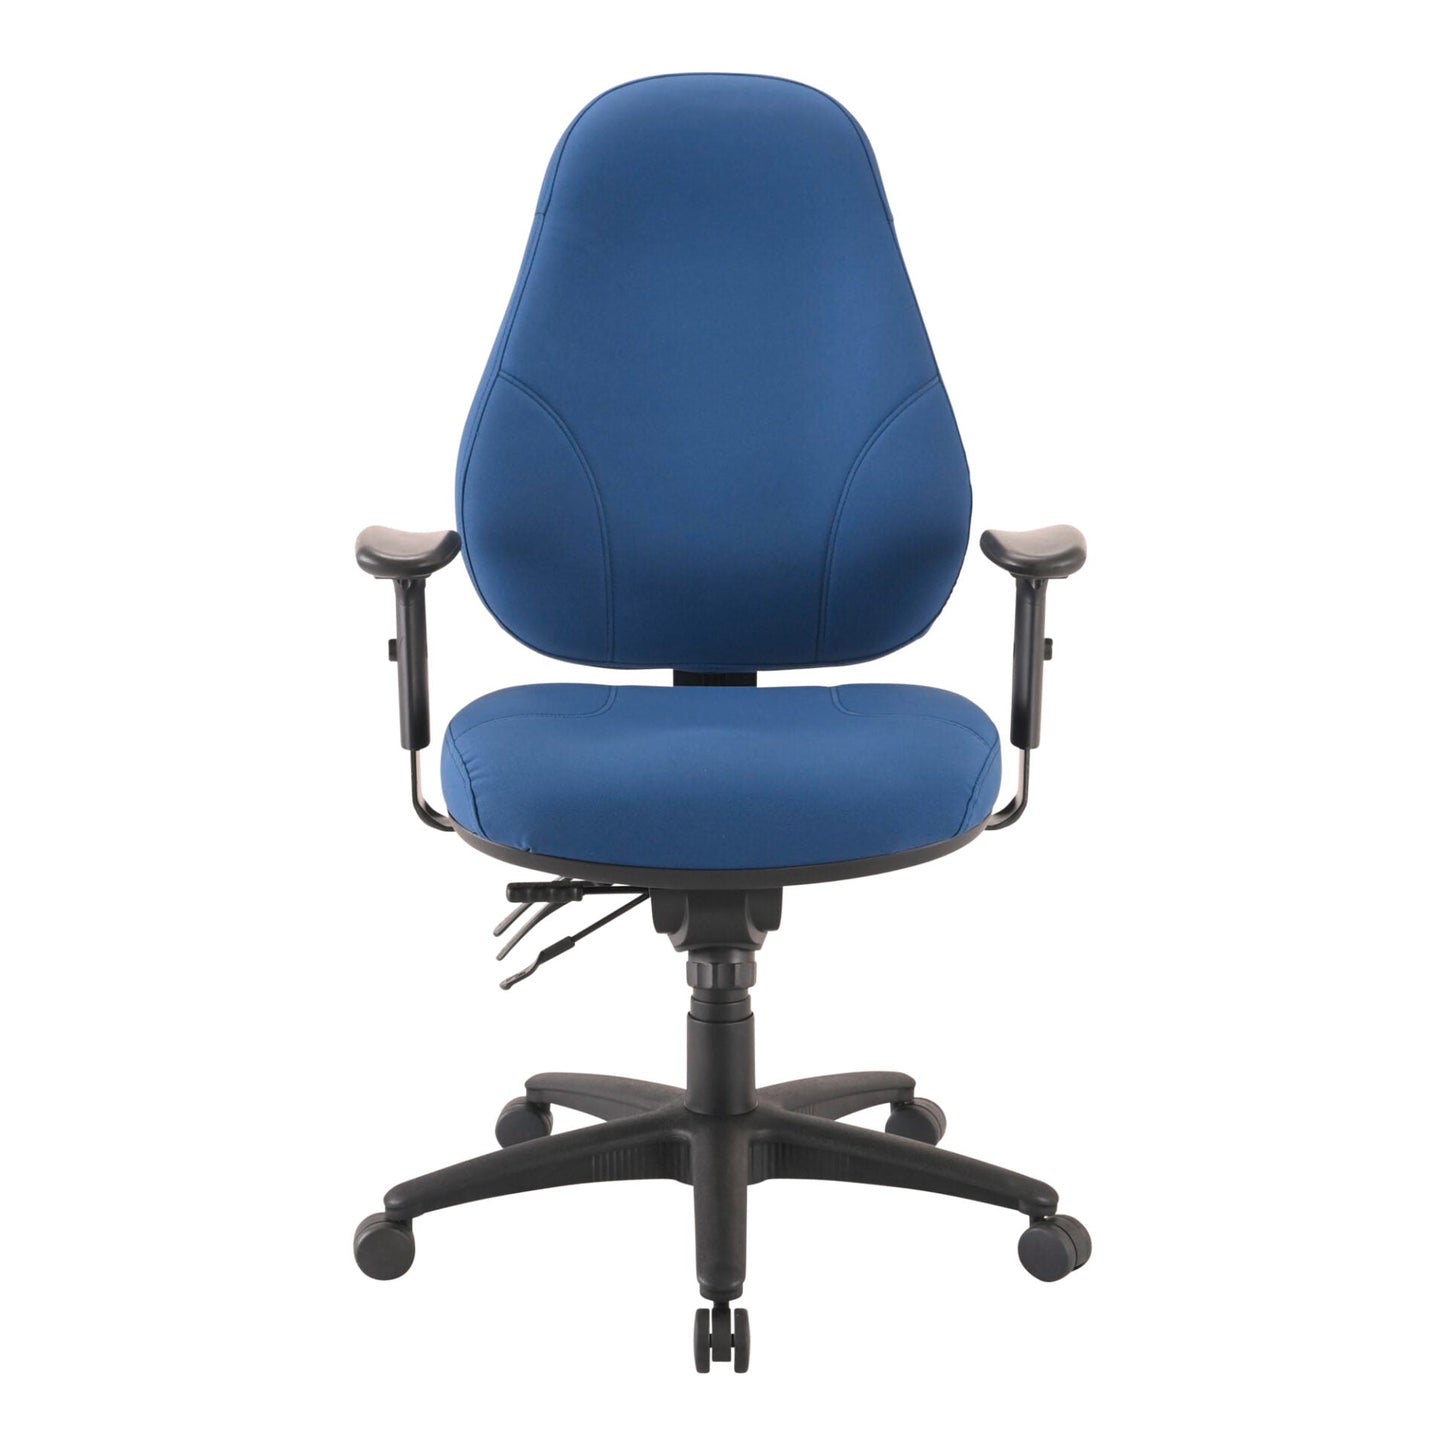 Persona Chair - 24/7